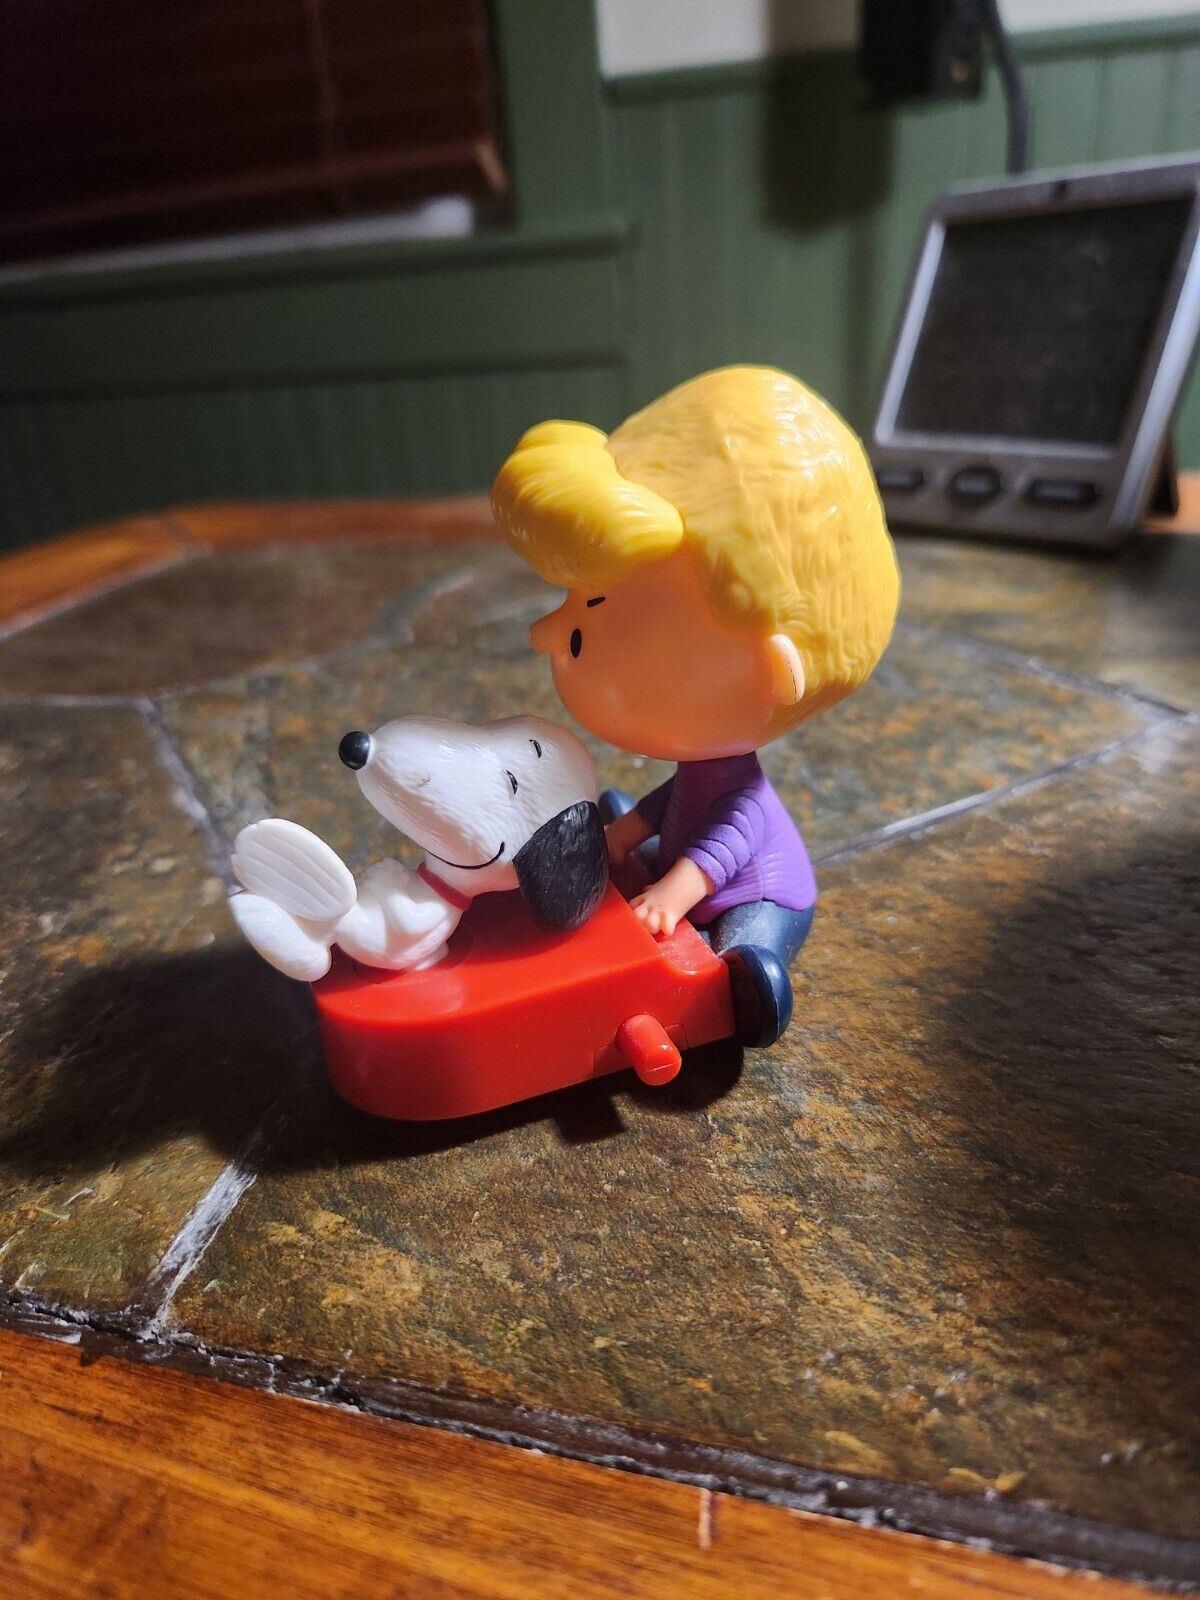 McDonald's Happy Meal Toy 2015 Peanuts' Schroeder and Snoopy  The Peanuts Movie